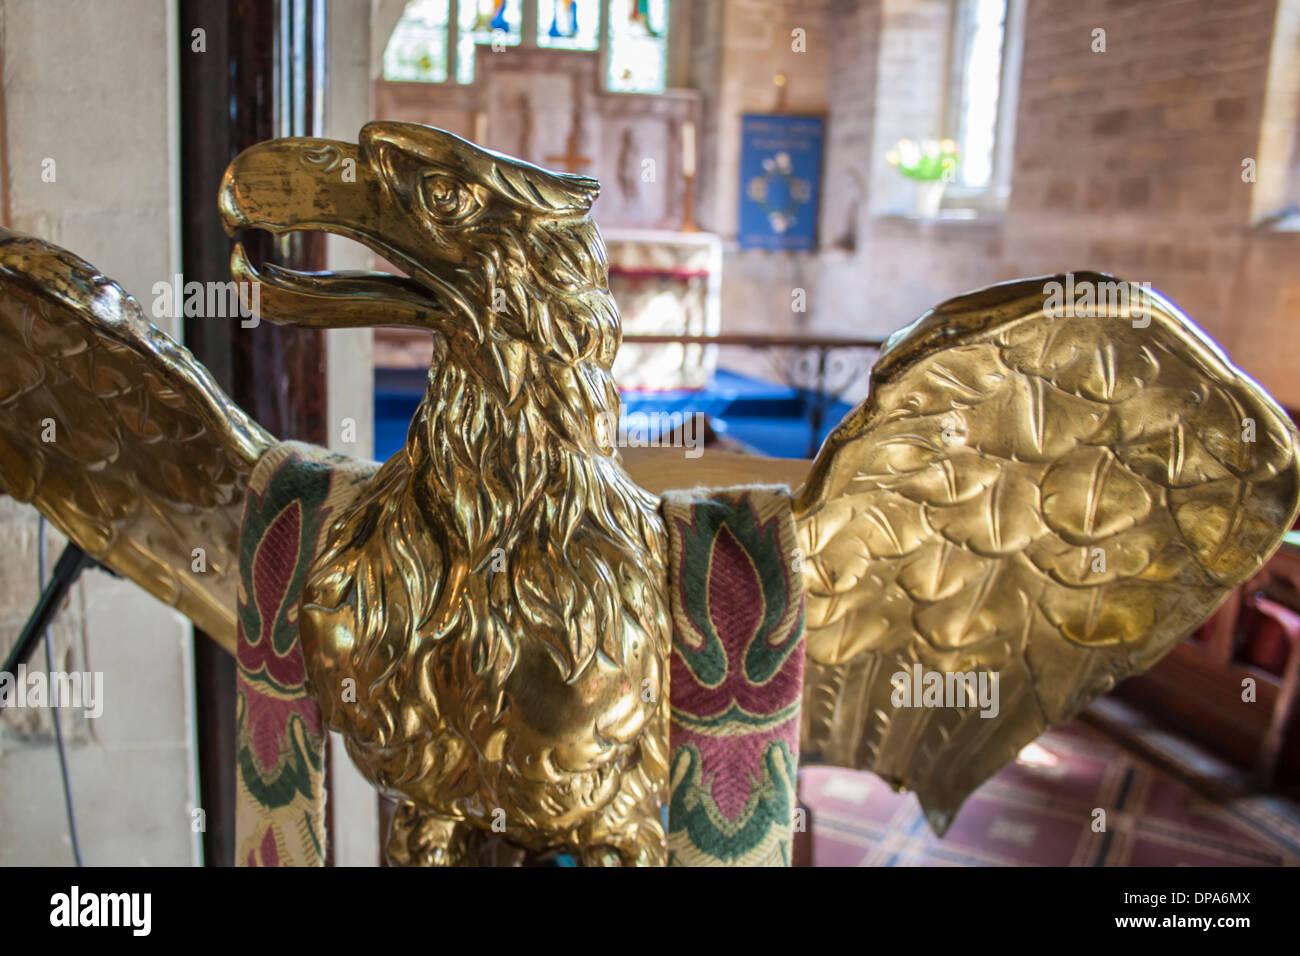 Church brass eagle lecturn in the Cotswolds: St Mary's Church, Lower Slaughter, Gloucestershire. UK. Stock Photo